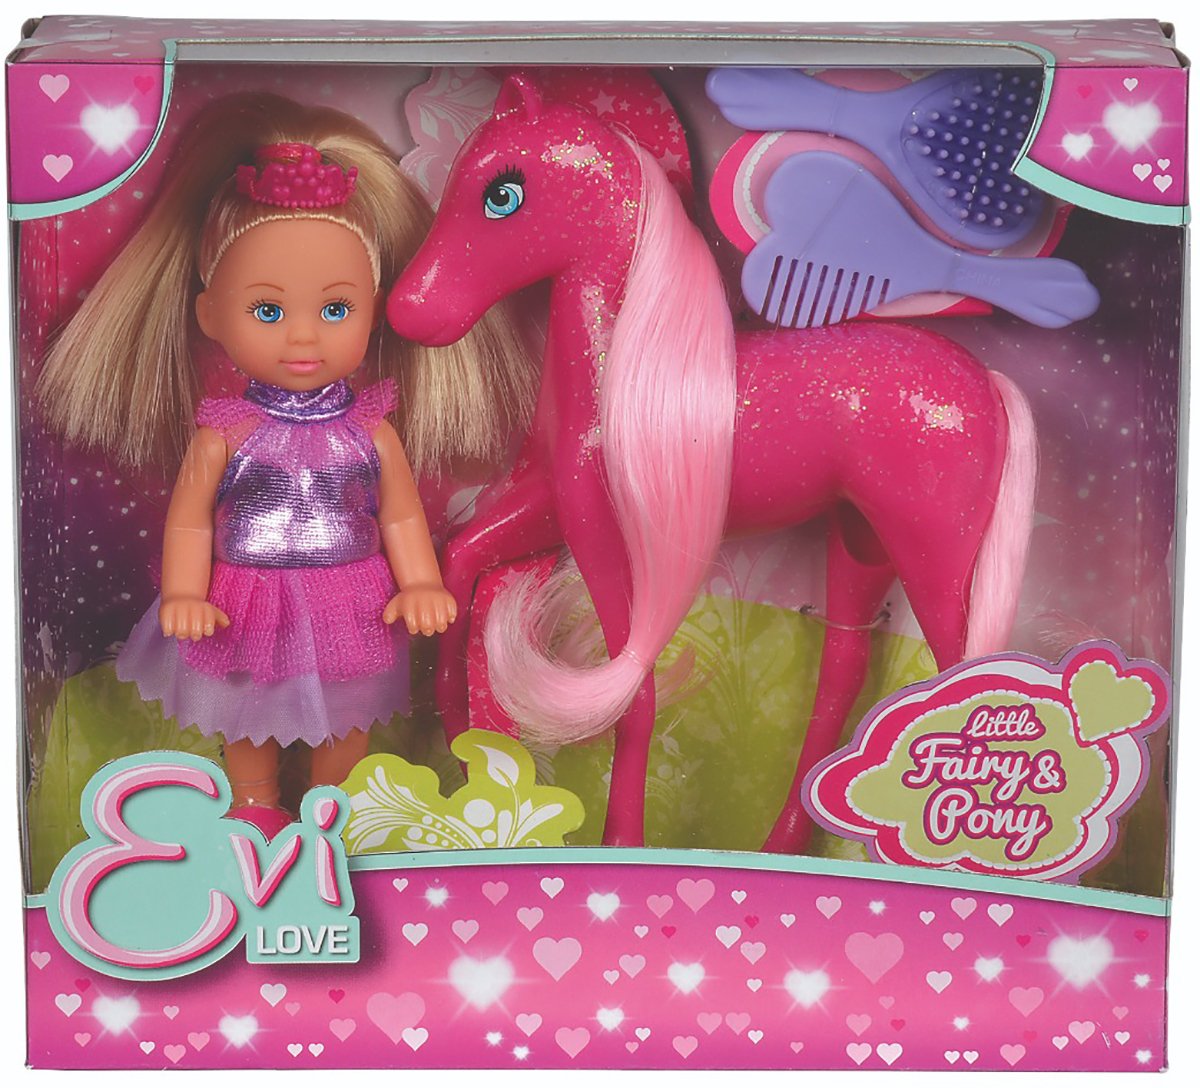 Papusa Evi Love Little Fairy and Pony and